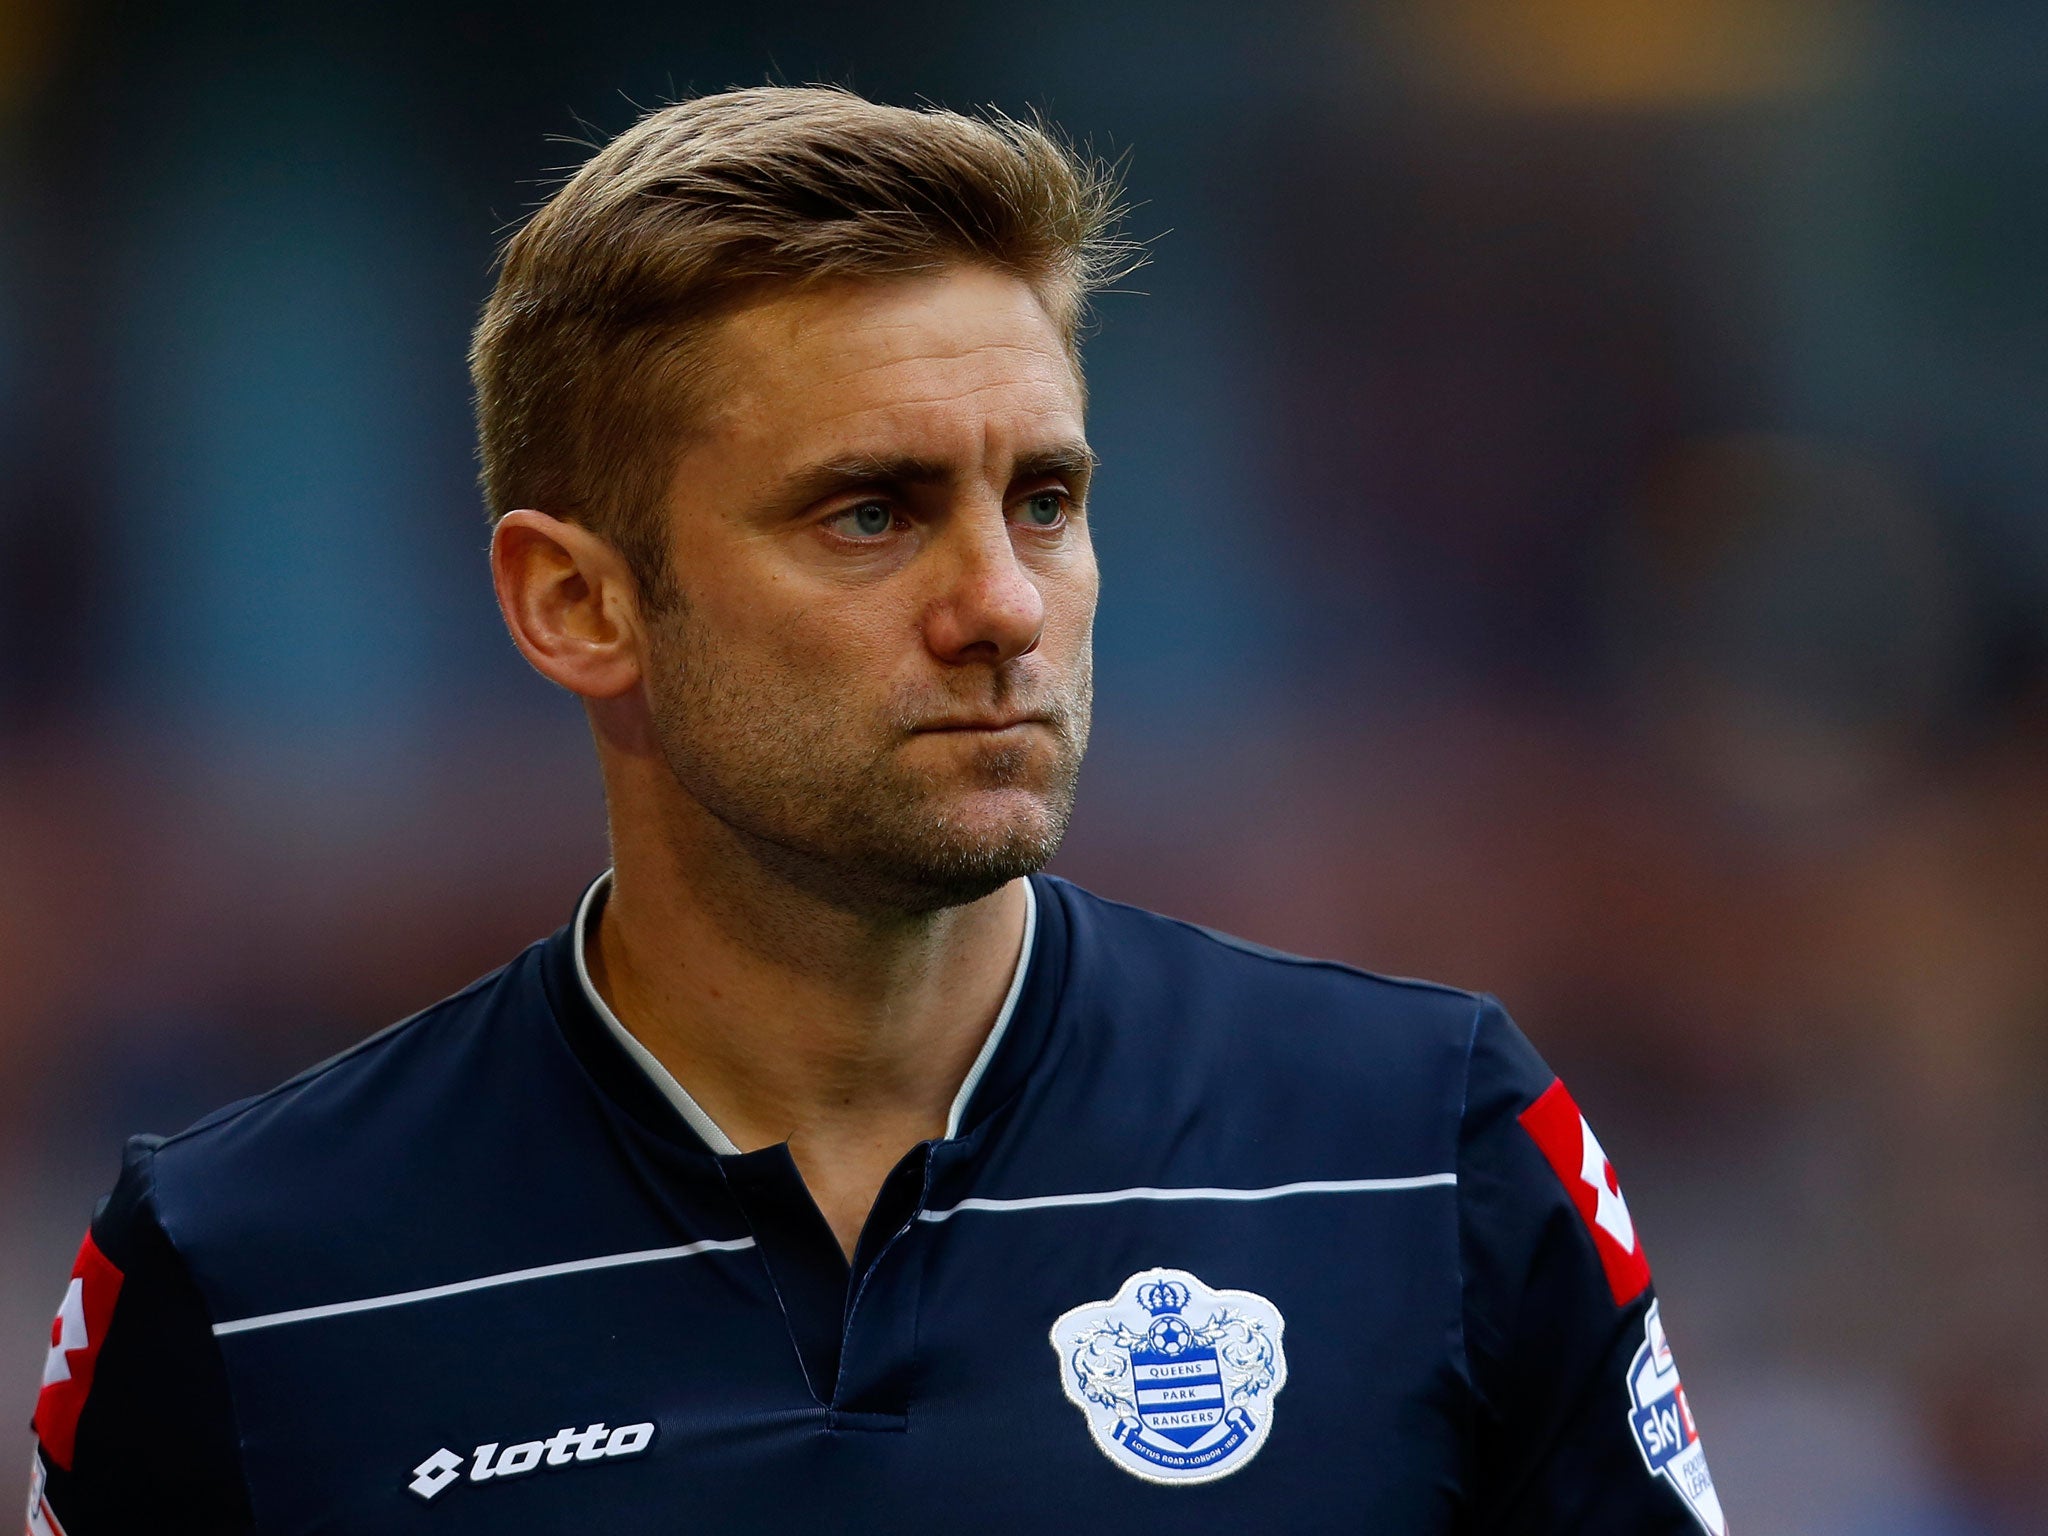 Rob Green’s World Cup calamity cost him his place and his reputation – and led to years of angst